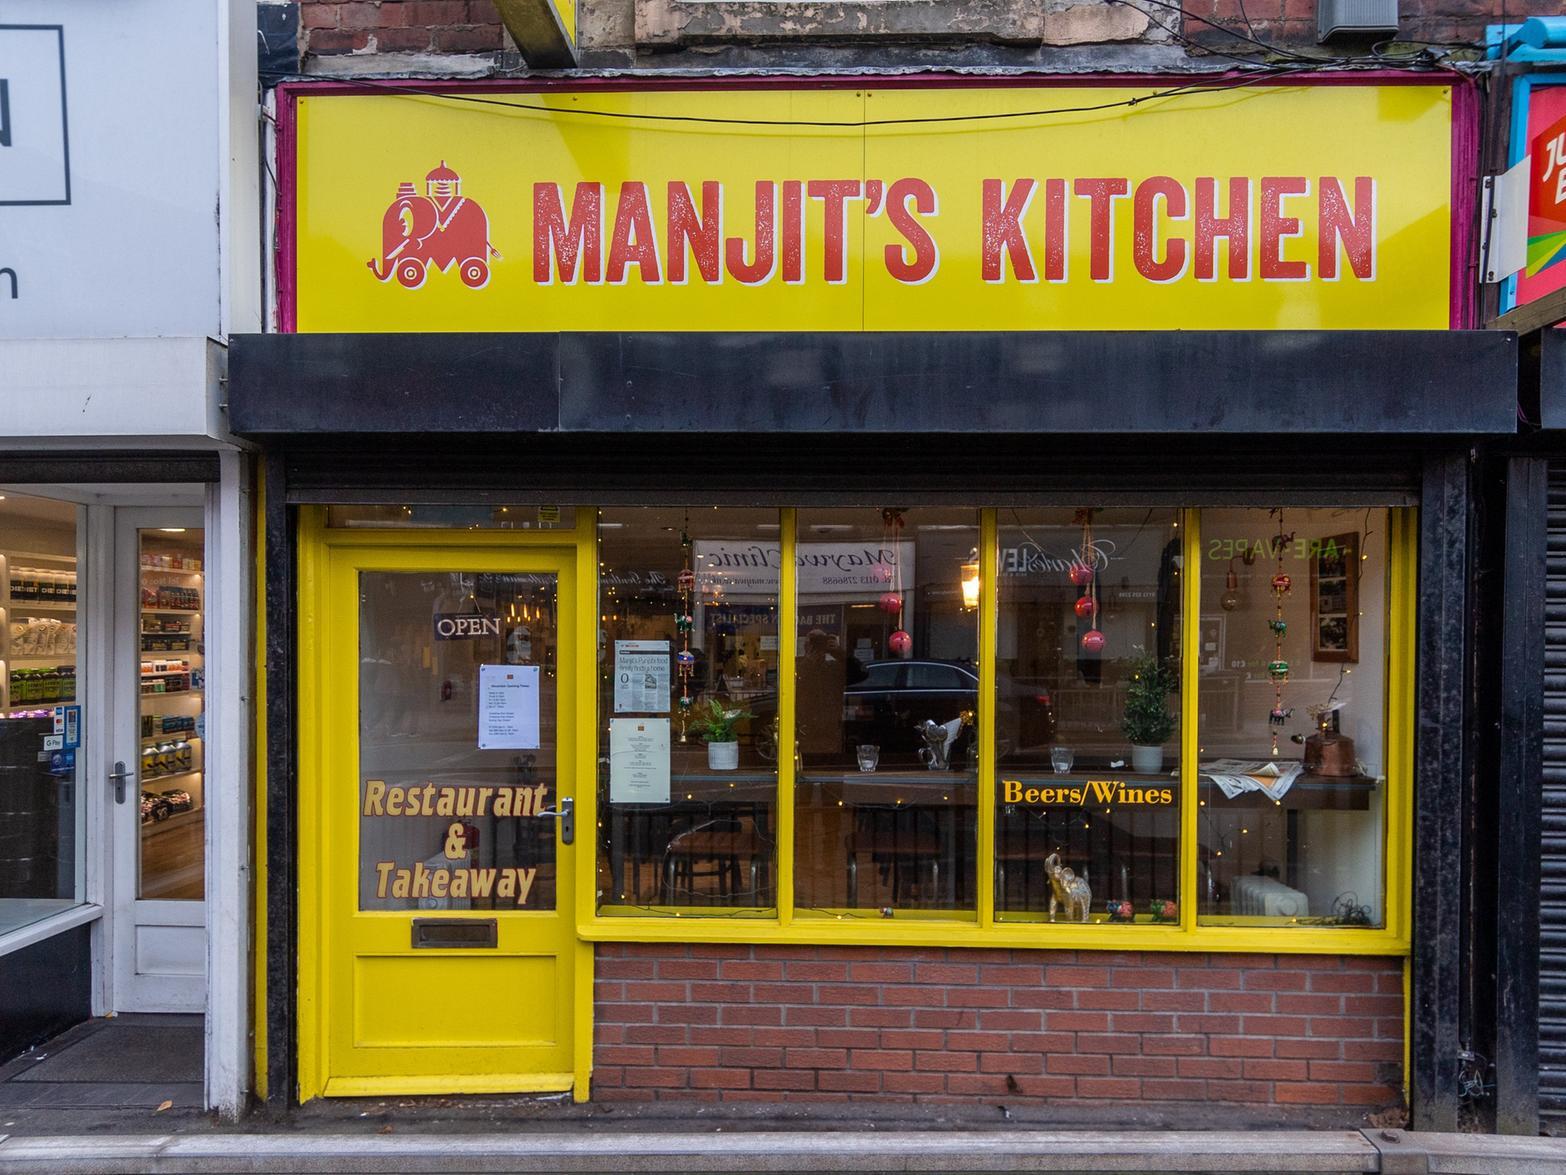 Launched as a home delivery business in 2010, the brand of vegetarian Punjabi street food has become a hit. Now open in Leeds Market and on Kirkstall Road.